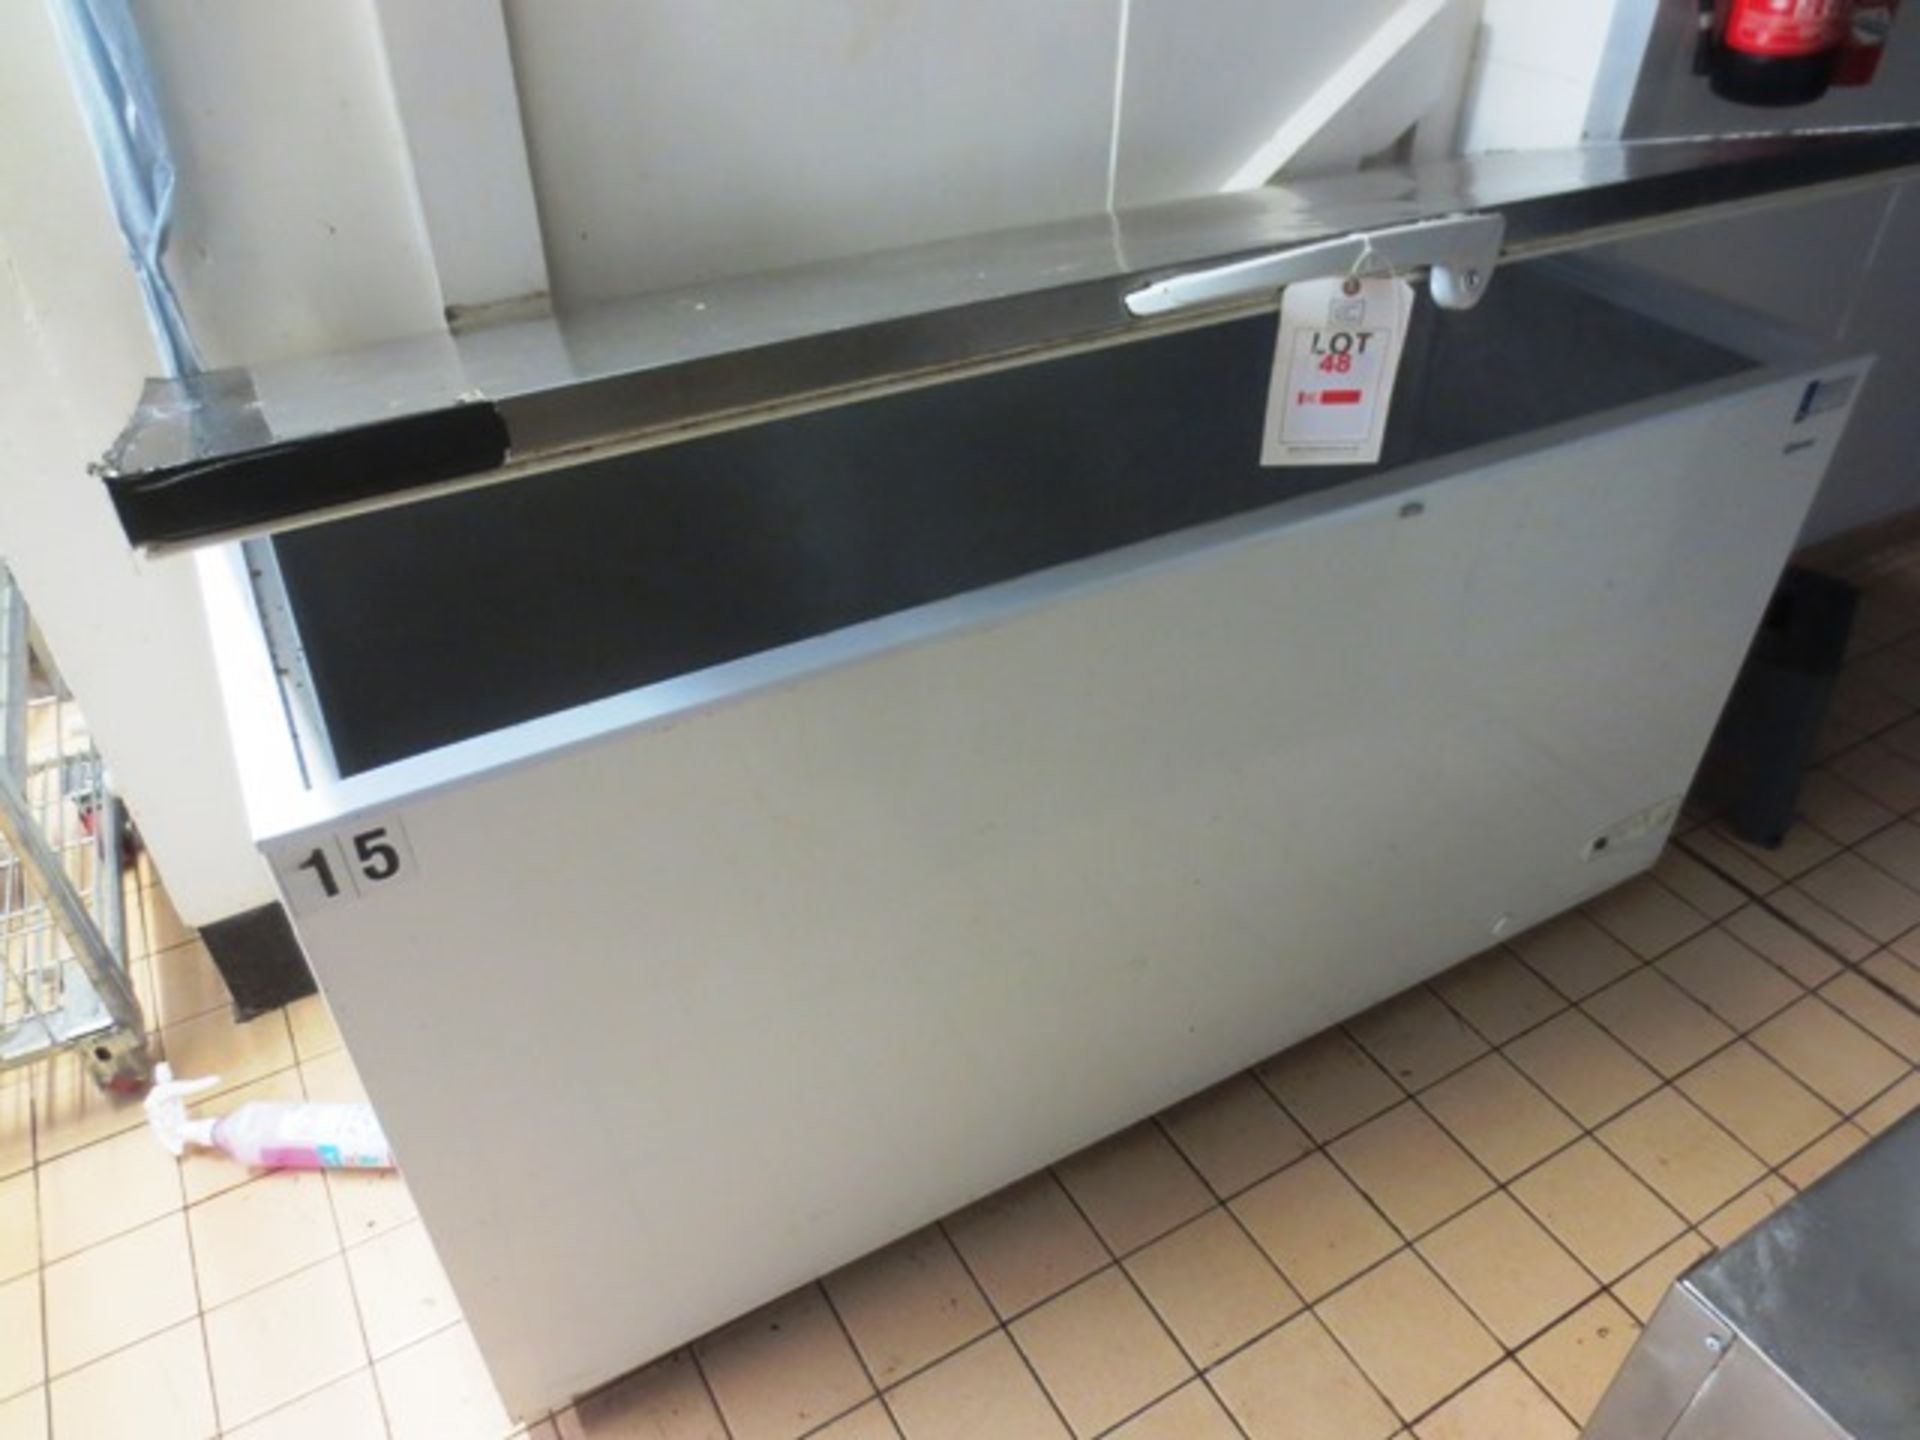 Gram chest freezer, approx 1700mm in length